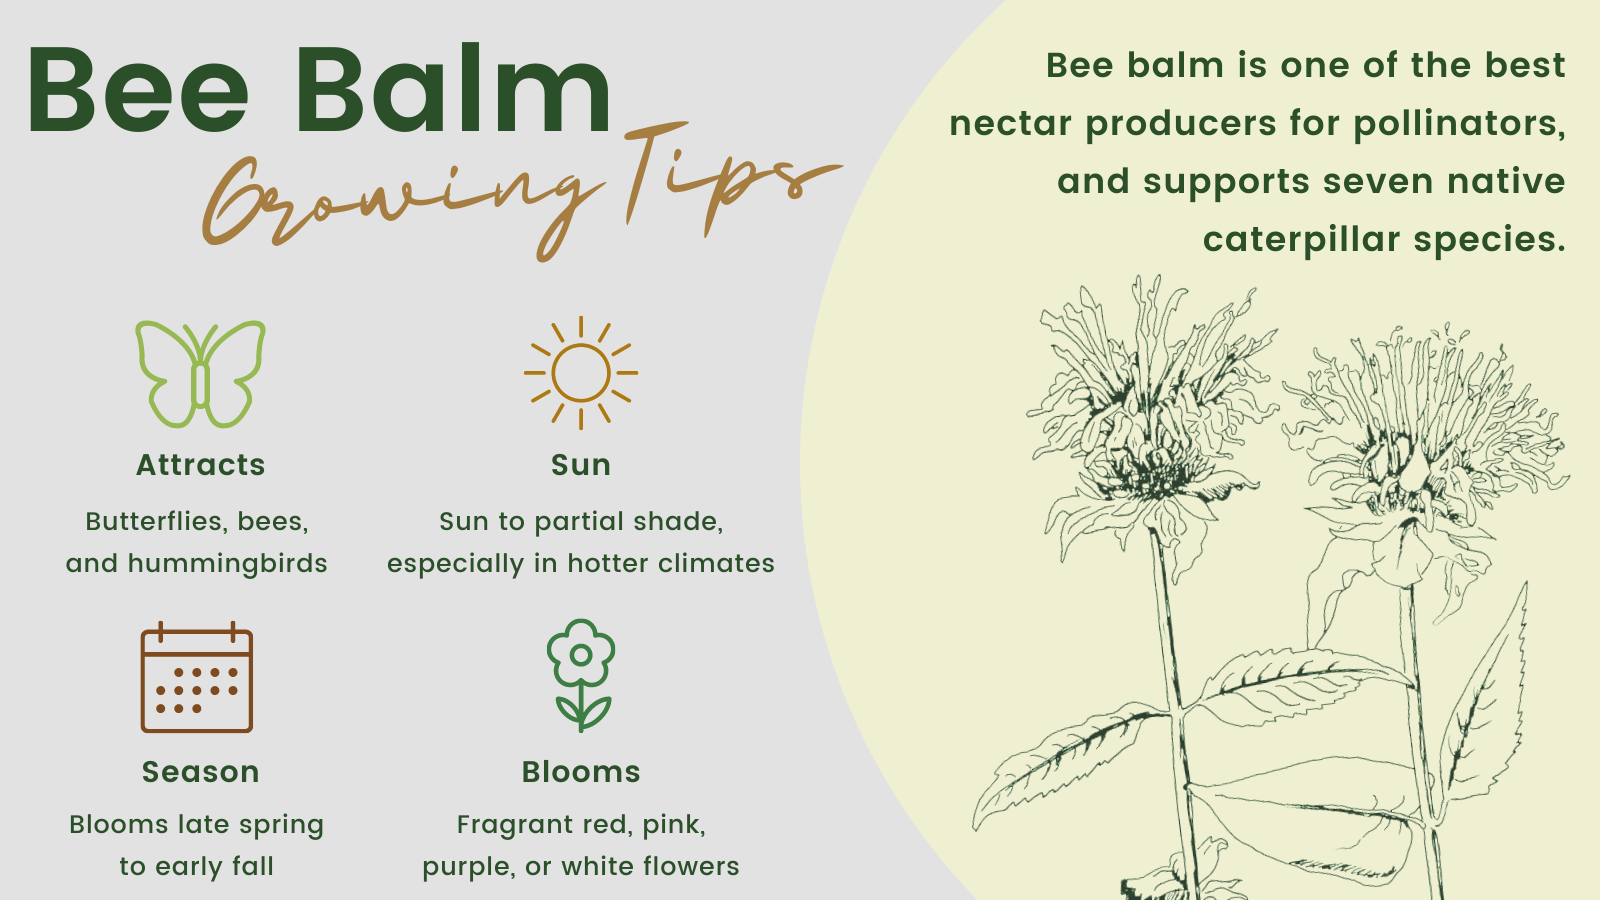 Bee Balm Growing Tips: Bee balm is one of the best nectar producers for pollinators, and supports seven native caterpillar species. Attracts: Butterflies, bees, and hummingbirds. Sun: Sun to partial shade, especially in hotter climates. Season: Blooms late spring to early fall. Blooms: Fragrant red, pink, purple, or white flowers.